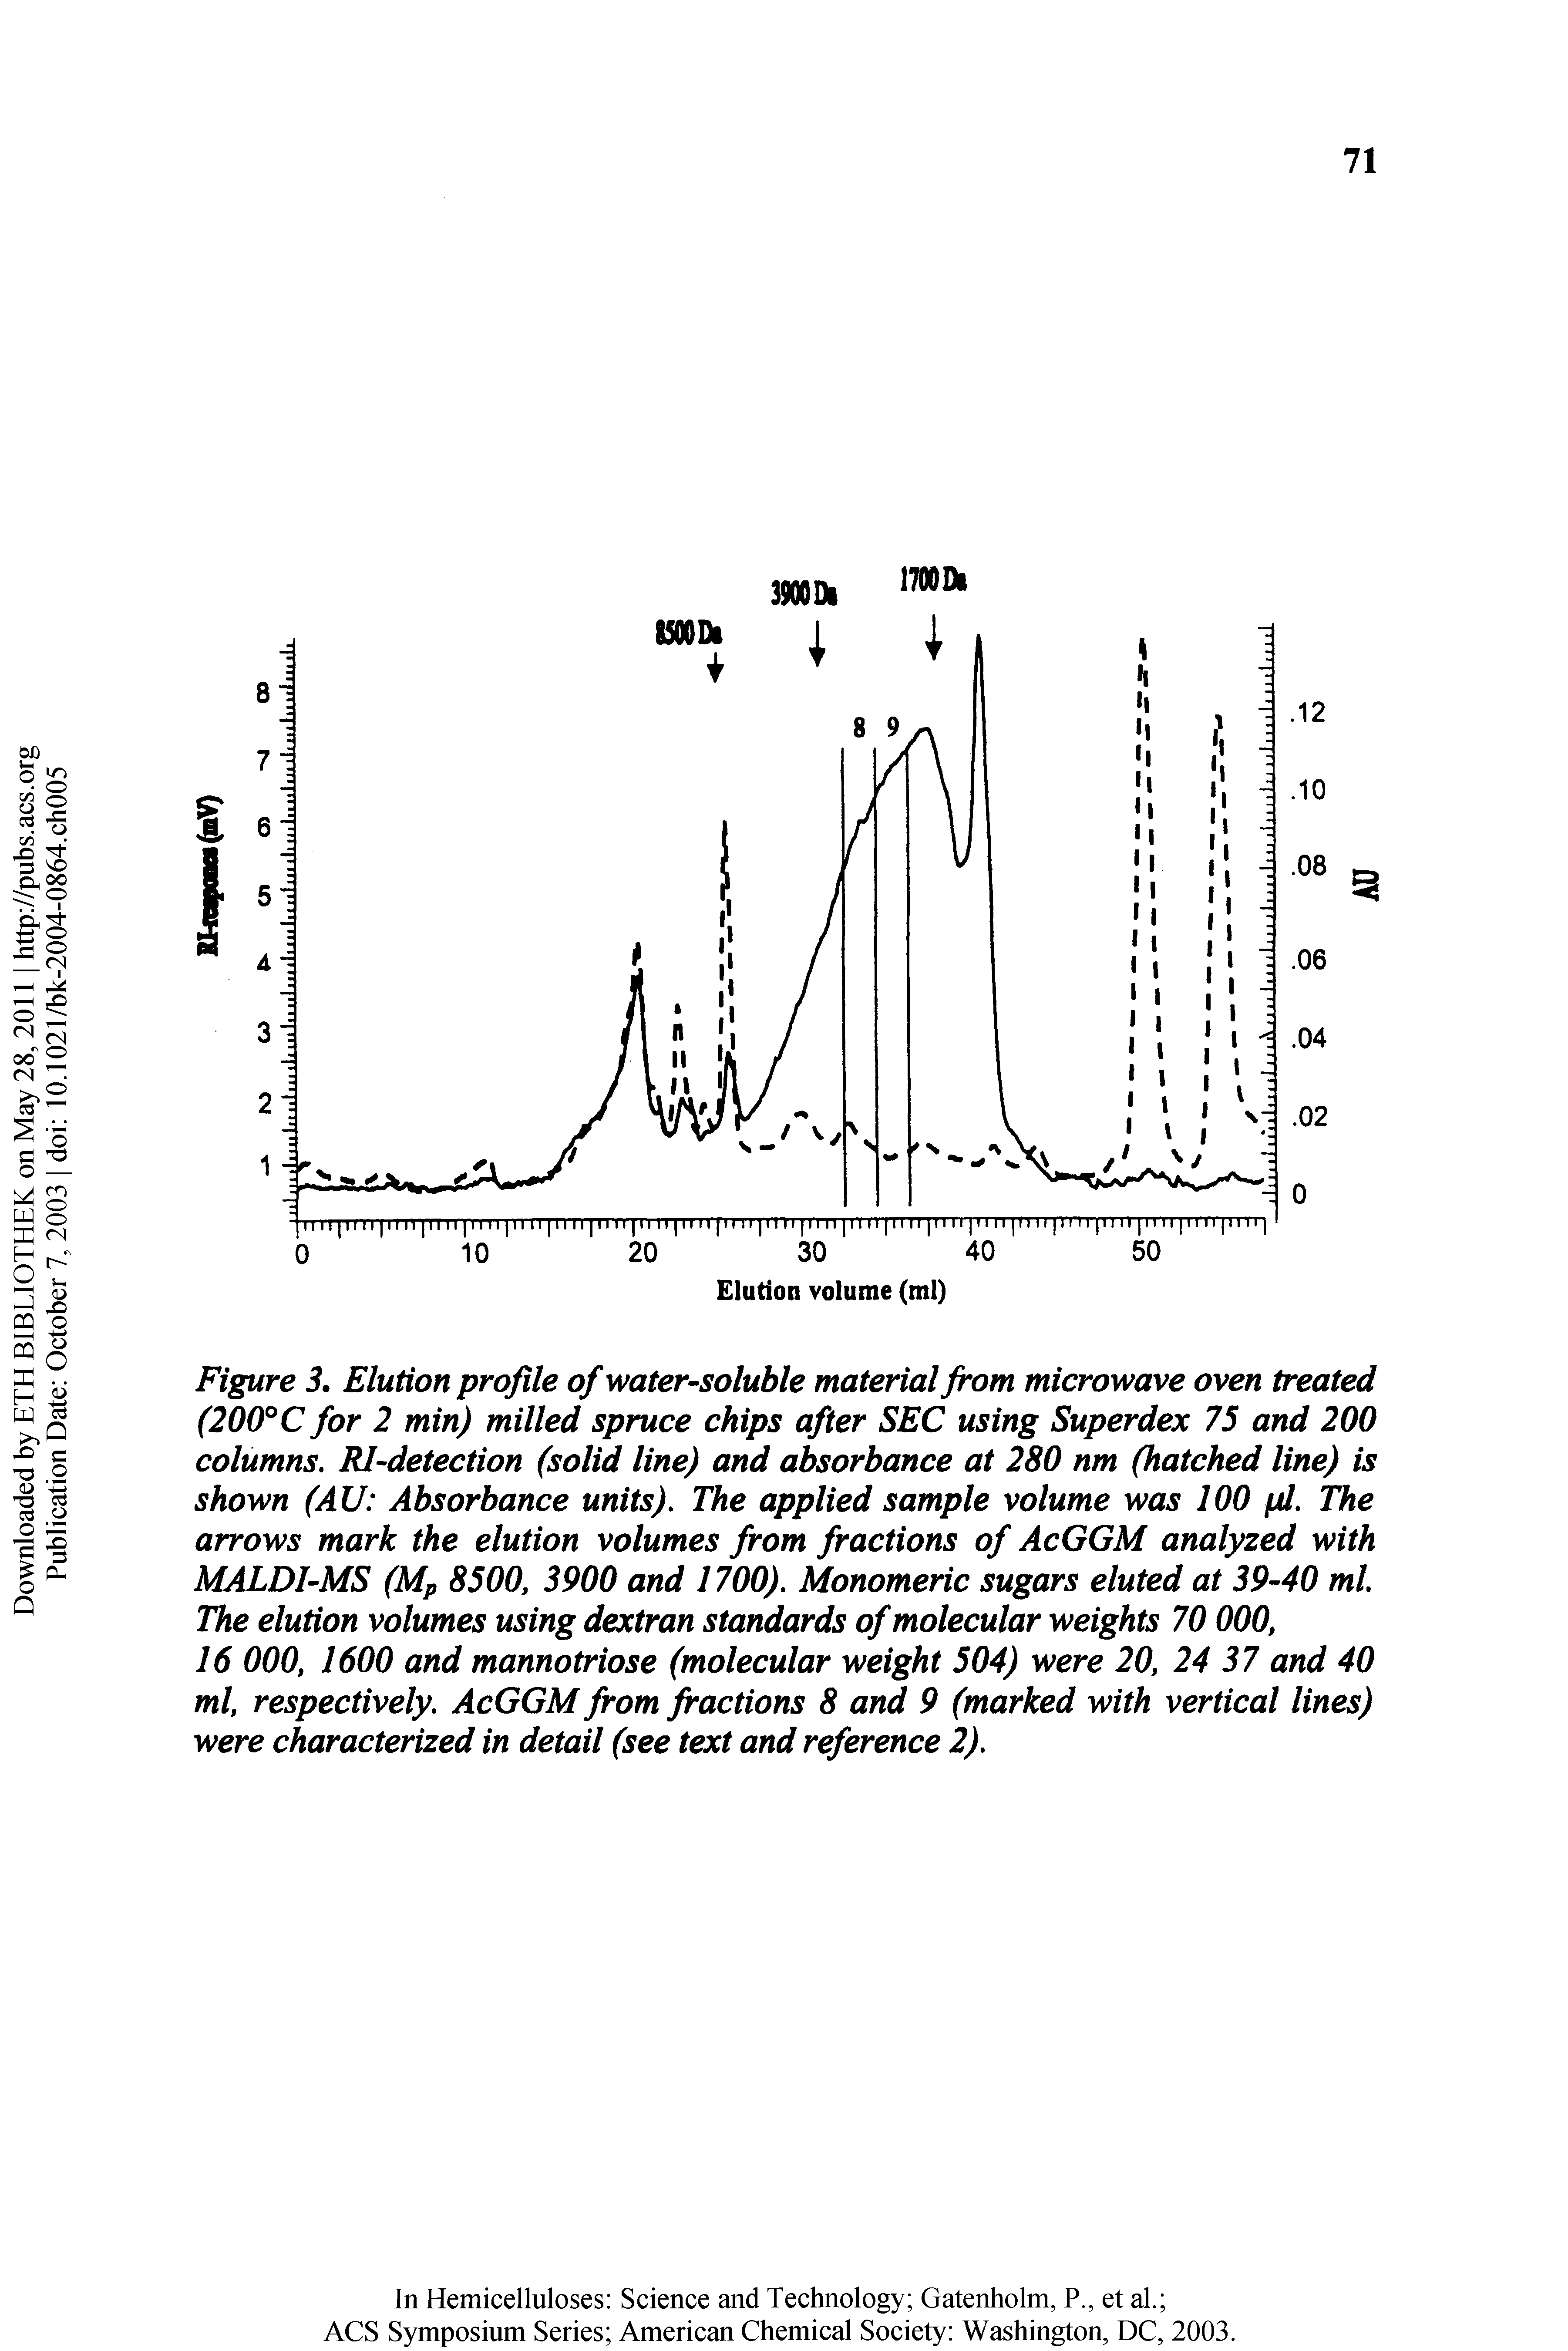 Figure 3, Elution profile of water-soluble material from microwave oven treated (200°C for 2 min) milled spruce chips after SEC using Superdex 75 and 200 columns, Rl-detection (solid line) and absorbance at 280 nm (hatched line) is shown (AU Absorbance units). The applied sample volume was 100 pd. The arrows mark the elution volumes from fractions of AcGGM analyzed with MALDI-MS (Mp 8500, 3900 and 1700). Monomeric sugars eluted at 39-40 ml. The elution volumes using dextran standards of molecular weights 70 000,...